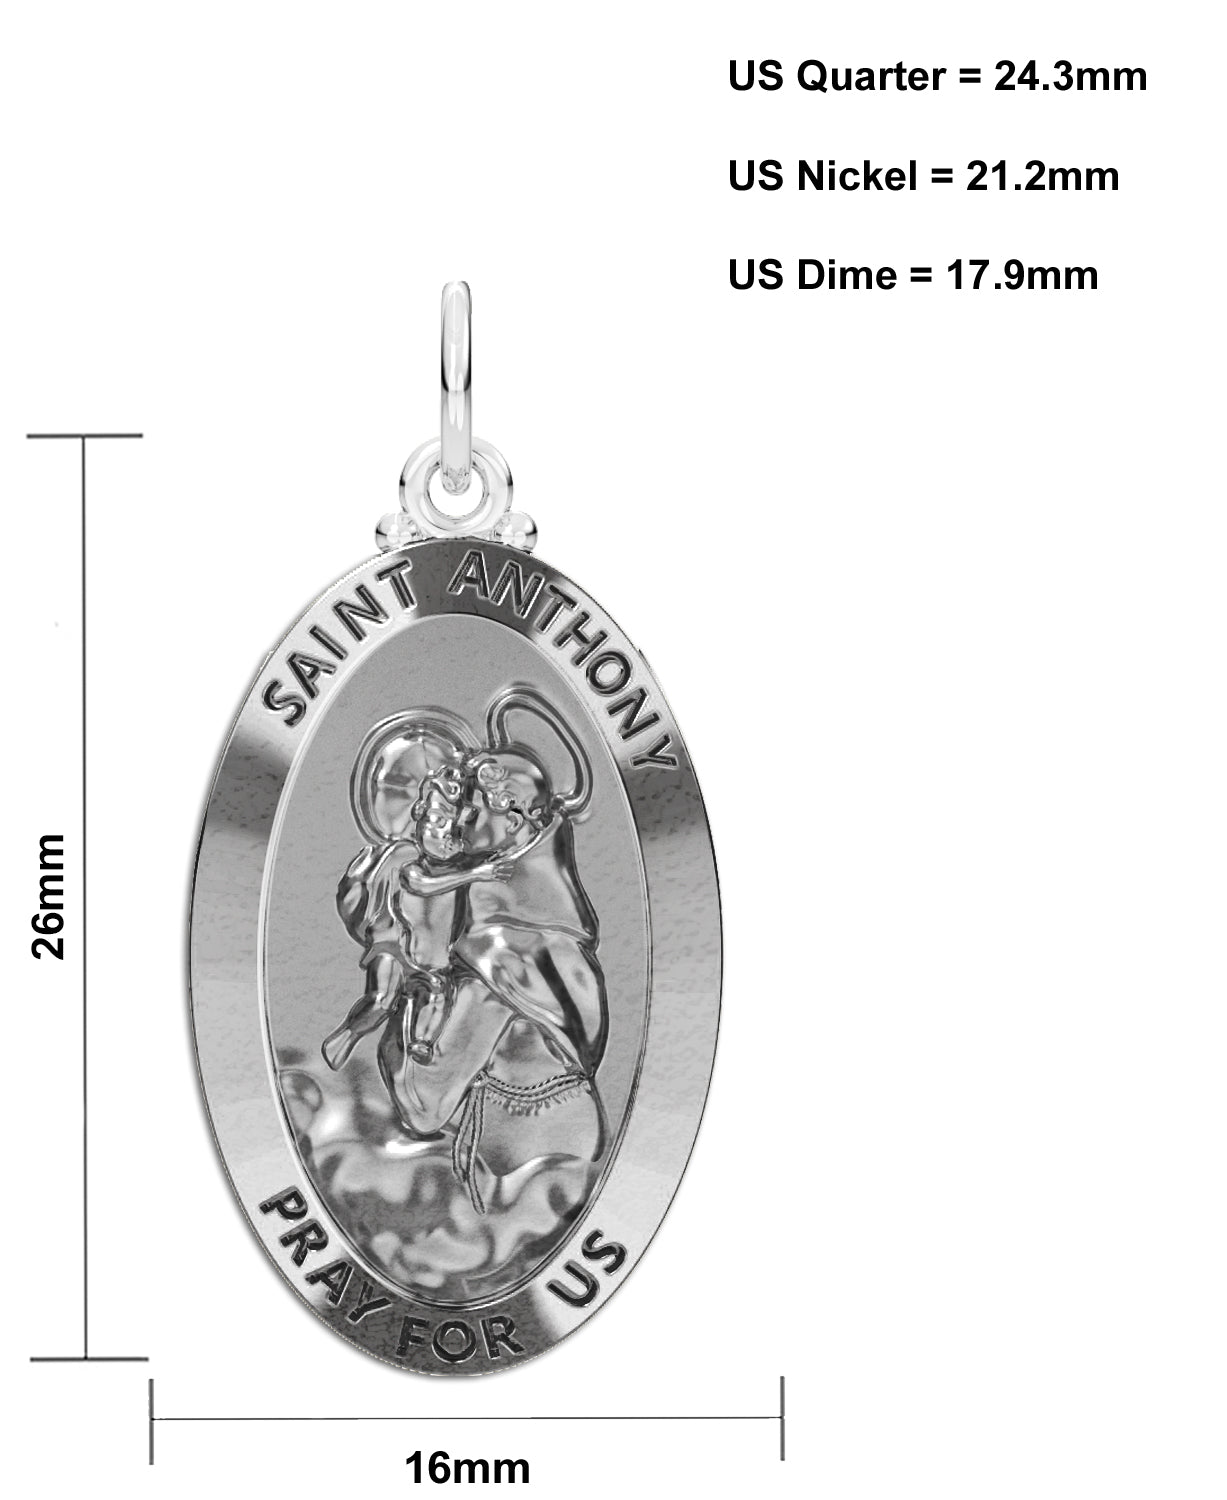 Ladies 925 Sterling Silver Saint Anthony Antique Finish Oval Pendant Necklace, 26mm - US Jewels